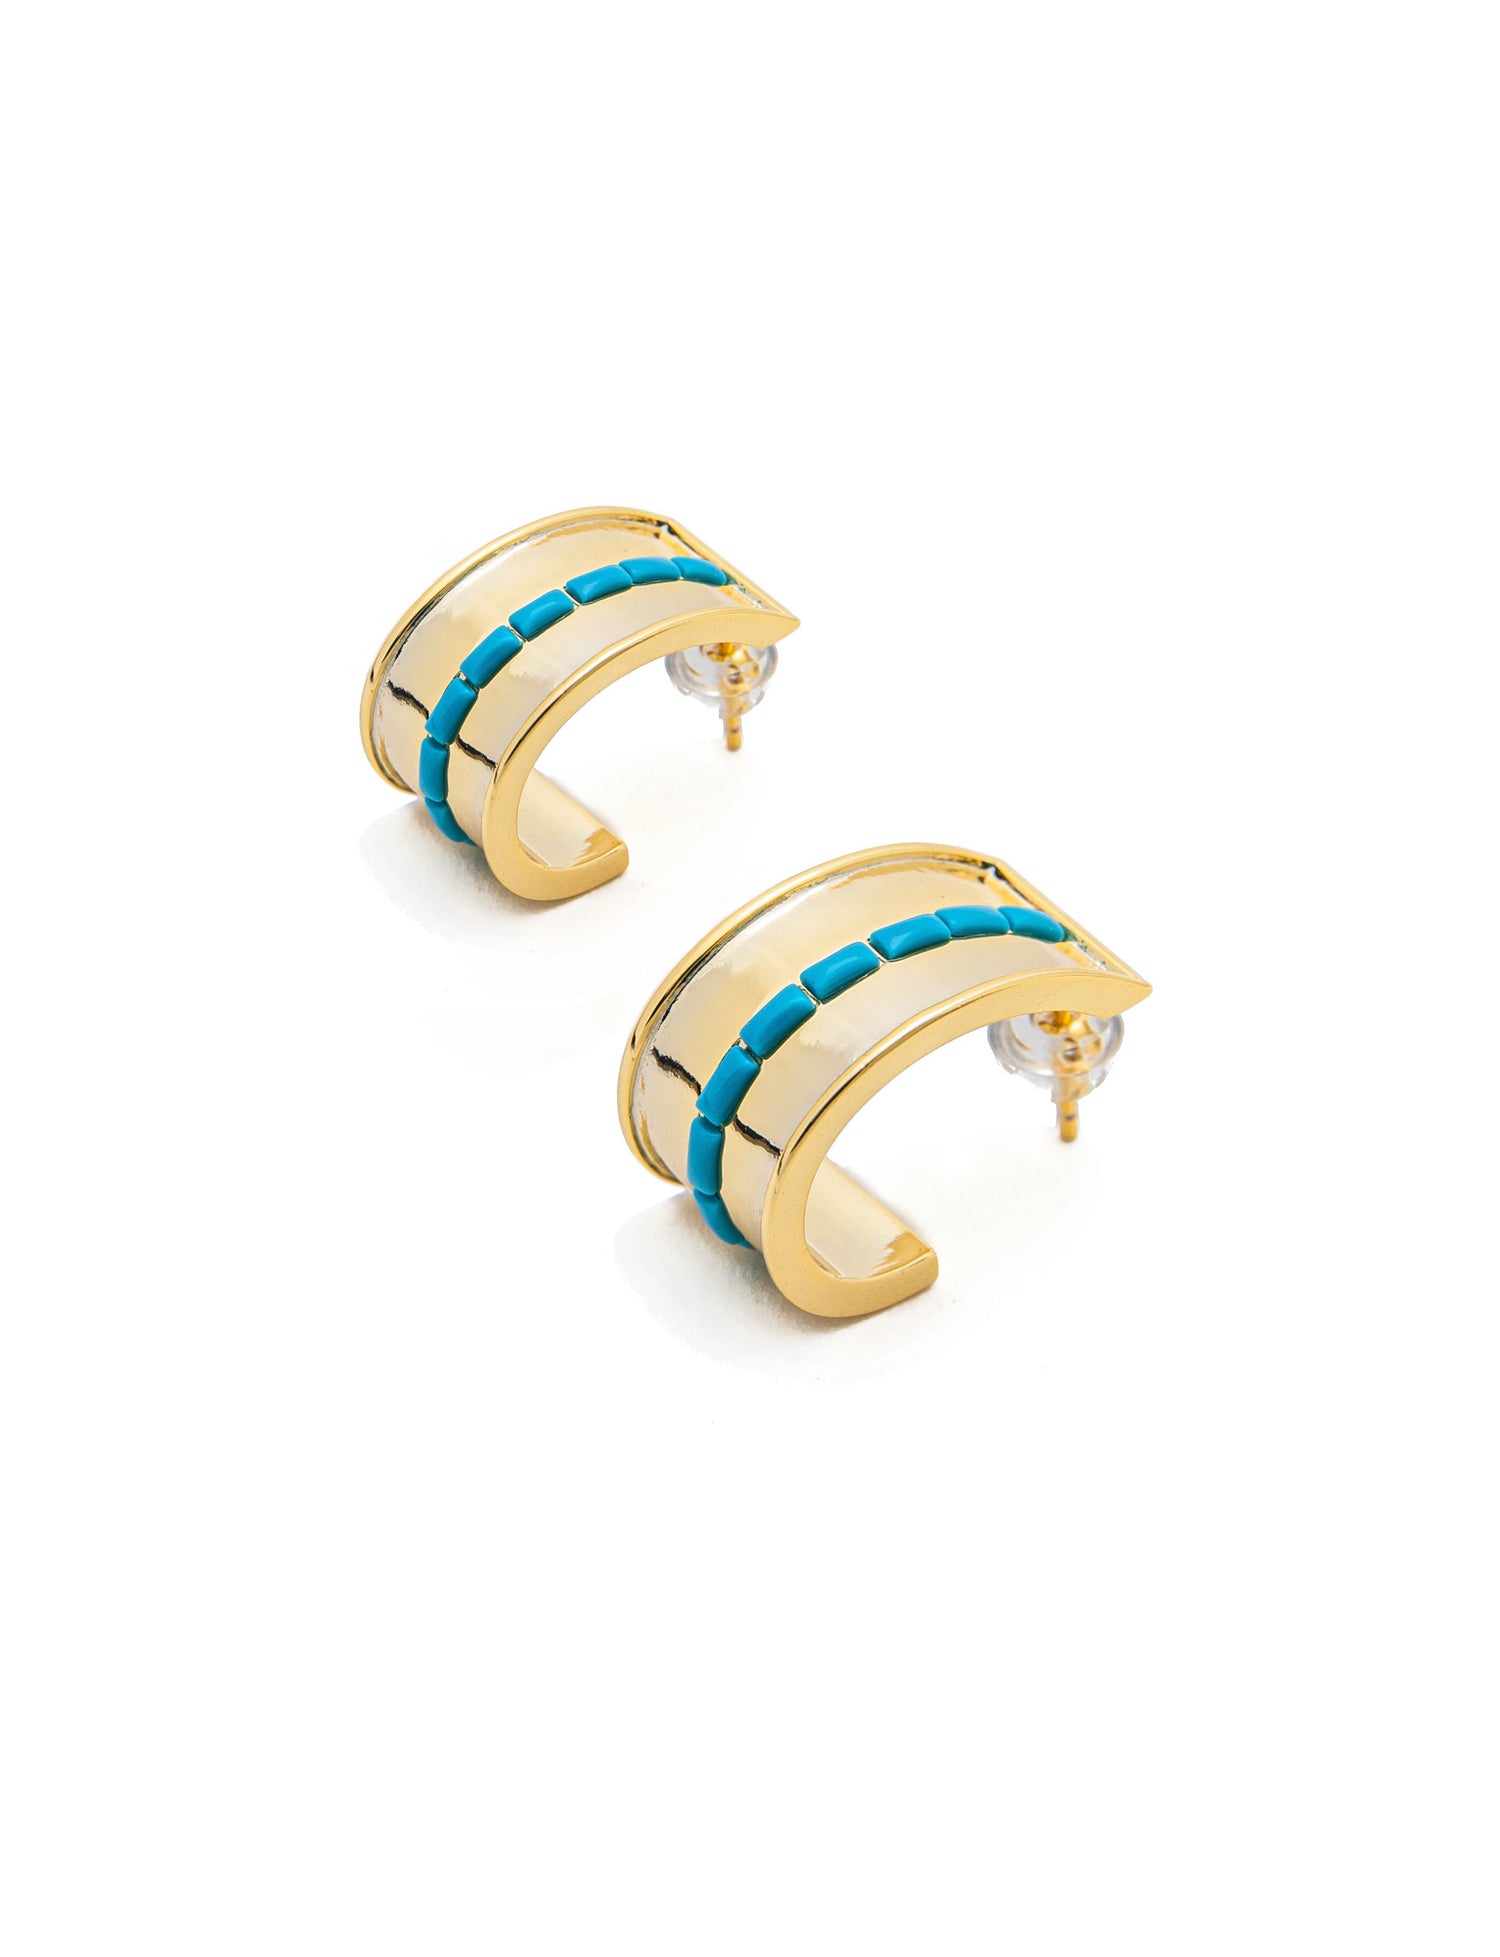 Turquoise Multi Stone Gold Cuff Earrings